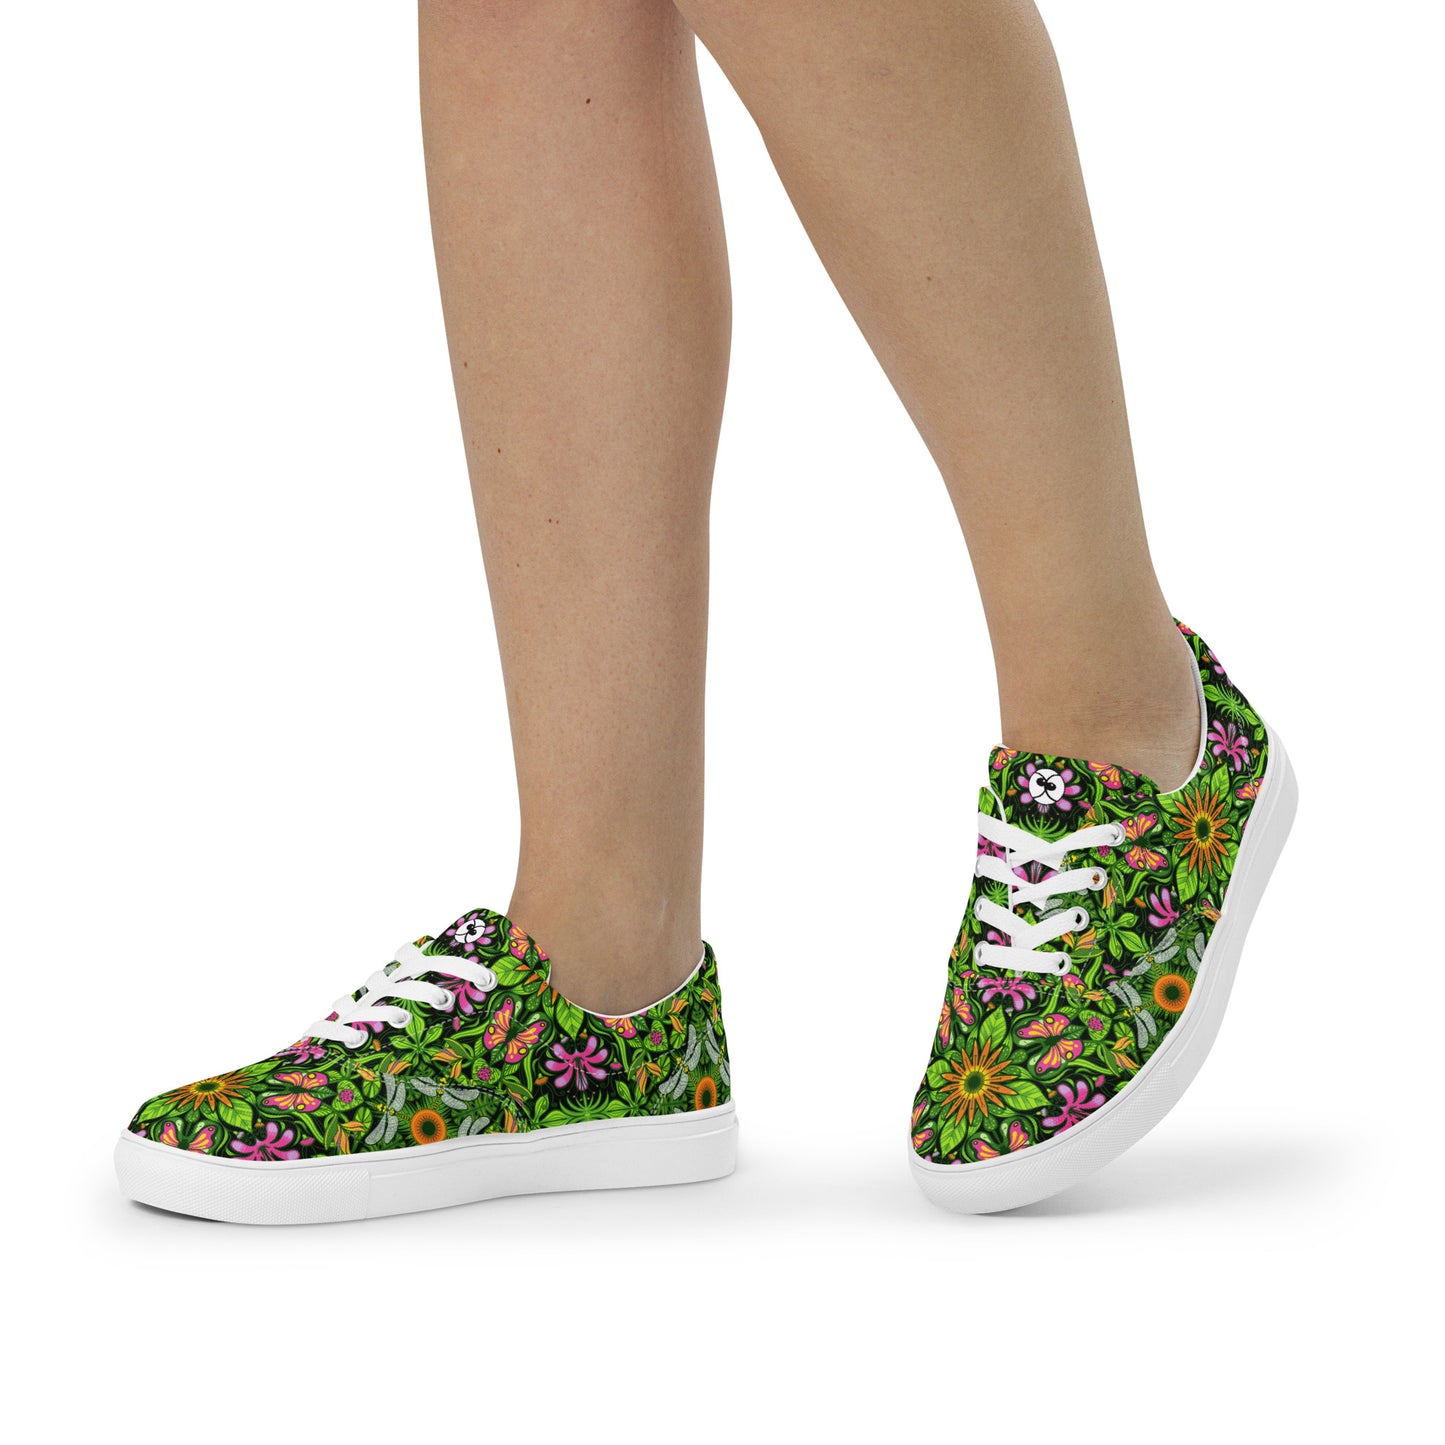 Magical garden full of flowers and insects Women’s lace-up canvas shoes. Lifestyle